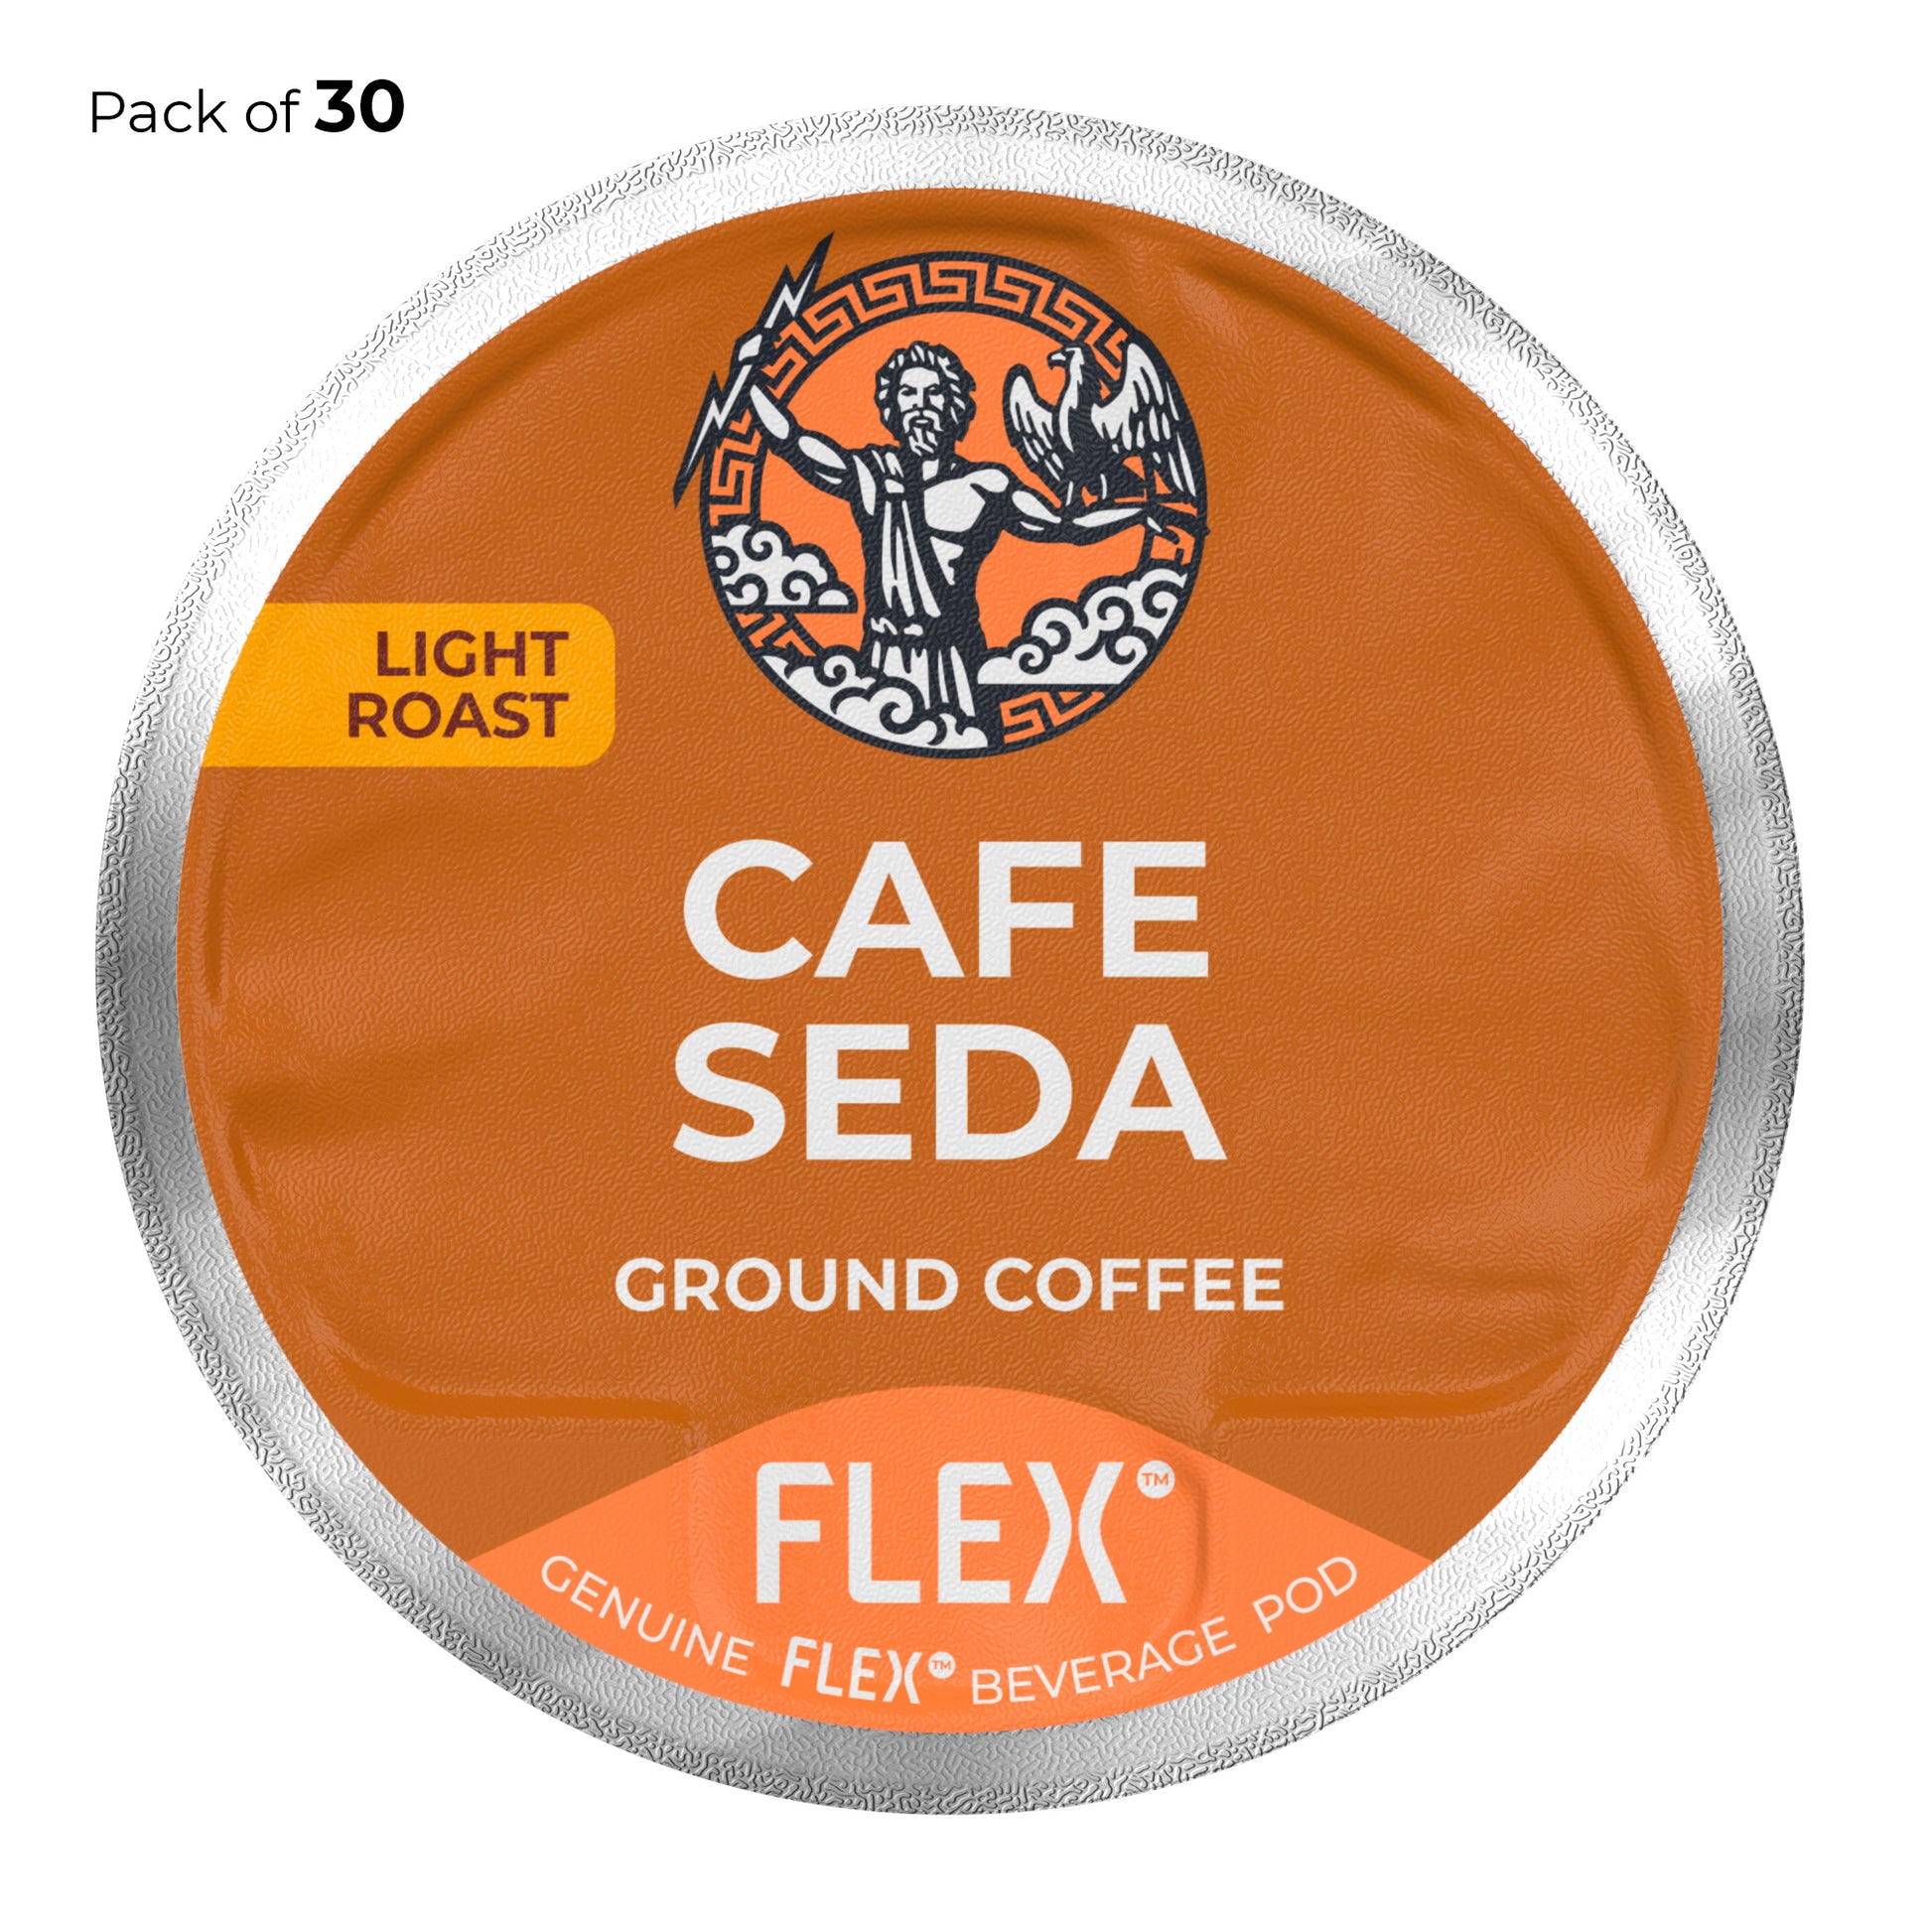 Label for a pack of 30 FLEXFUEL™ Café Seda Light Roast Ground Coffee pods, showcasing a warm brown background with a red tab indicating 'LIGHT ROAST' and the classic FLEX logo of Zeus and an eagle, signifying a smooth and light-bodied coffee experience.